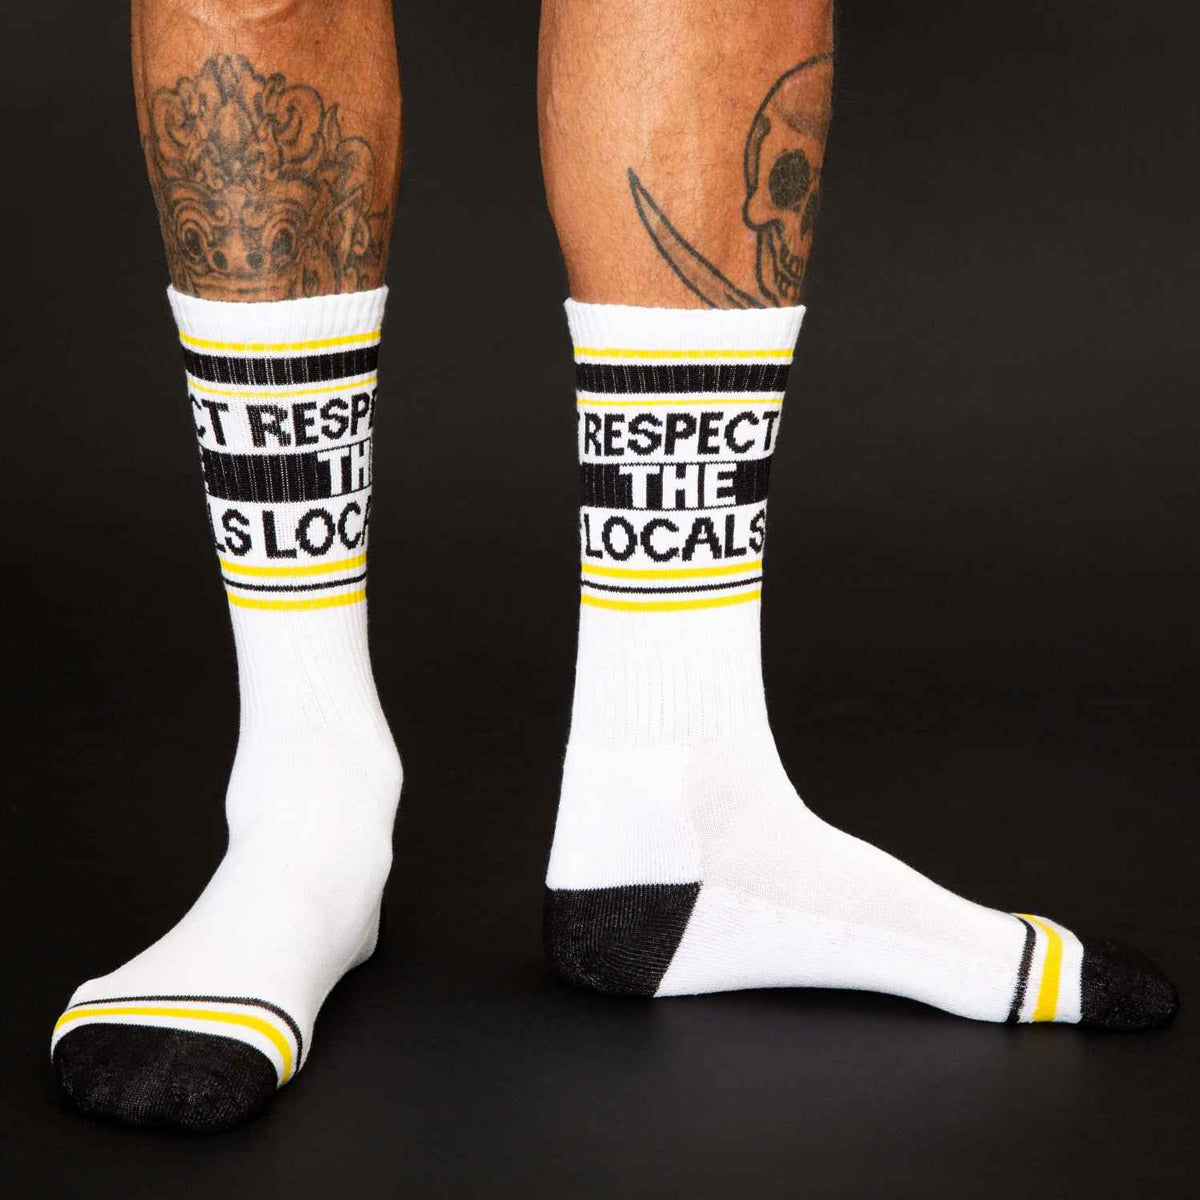 Funny gym socks that say, "Respect the Locals"